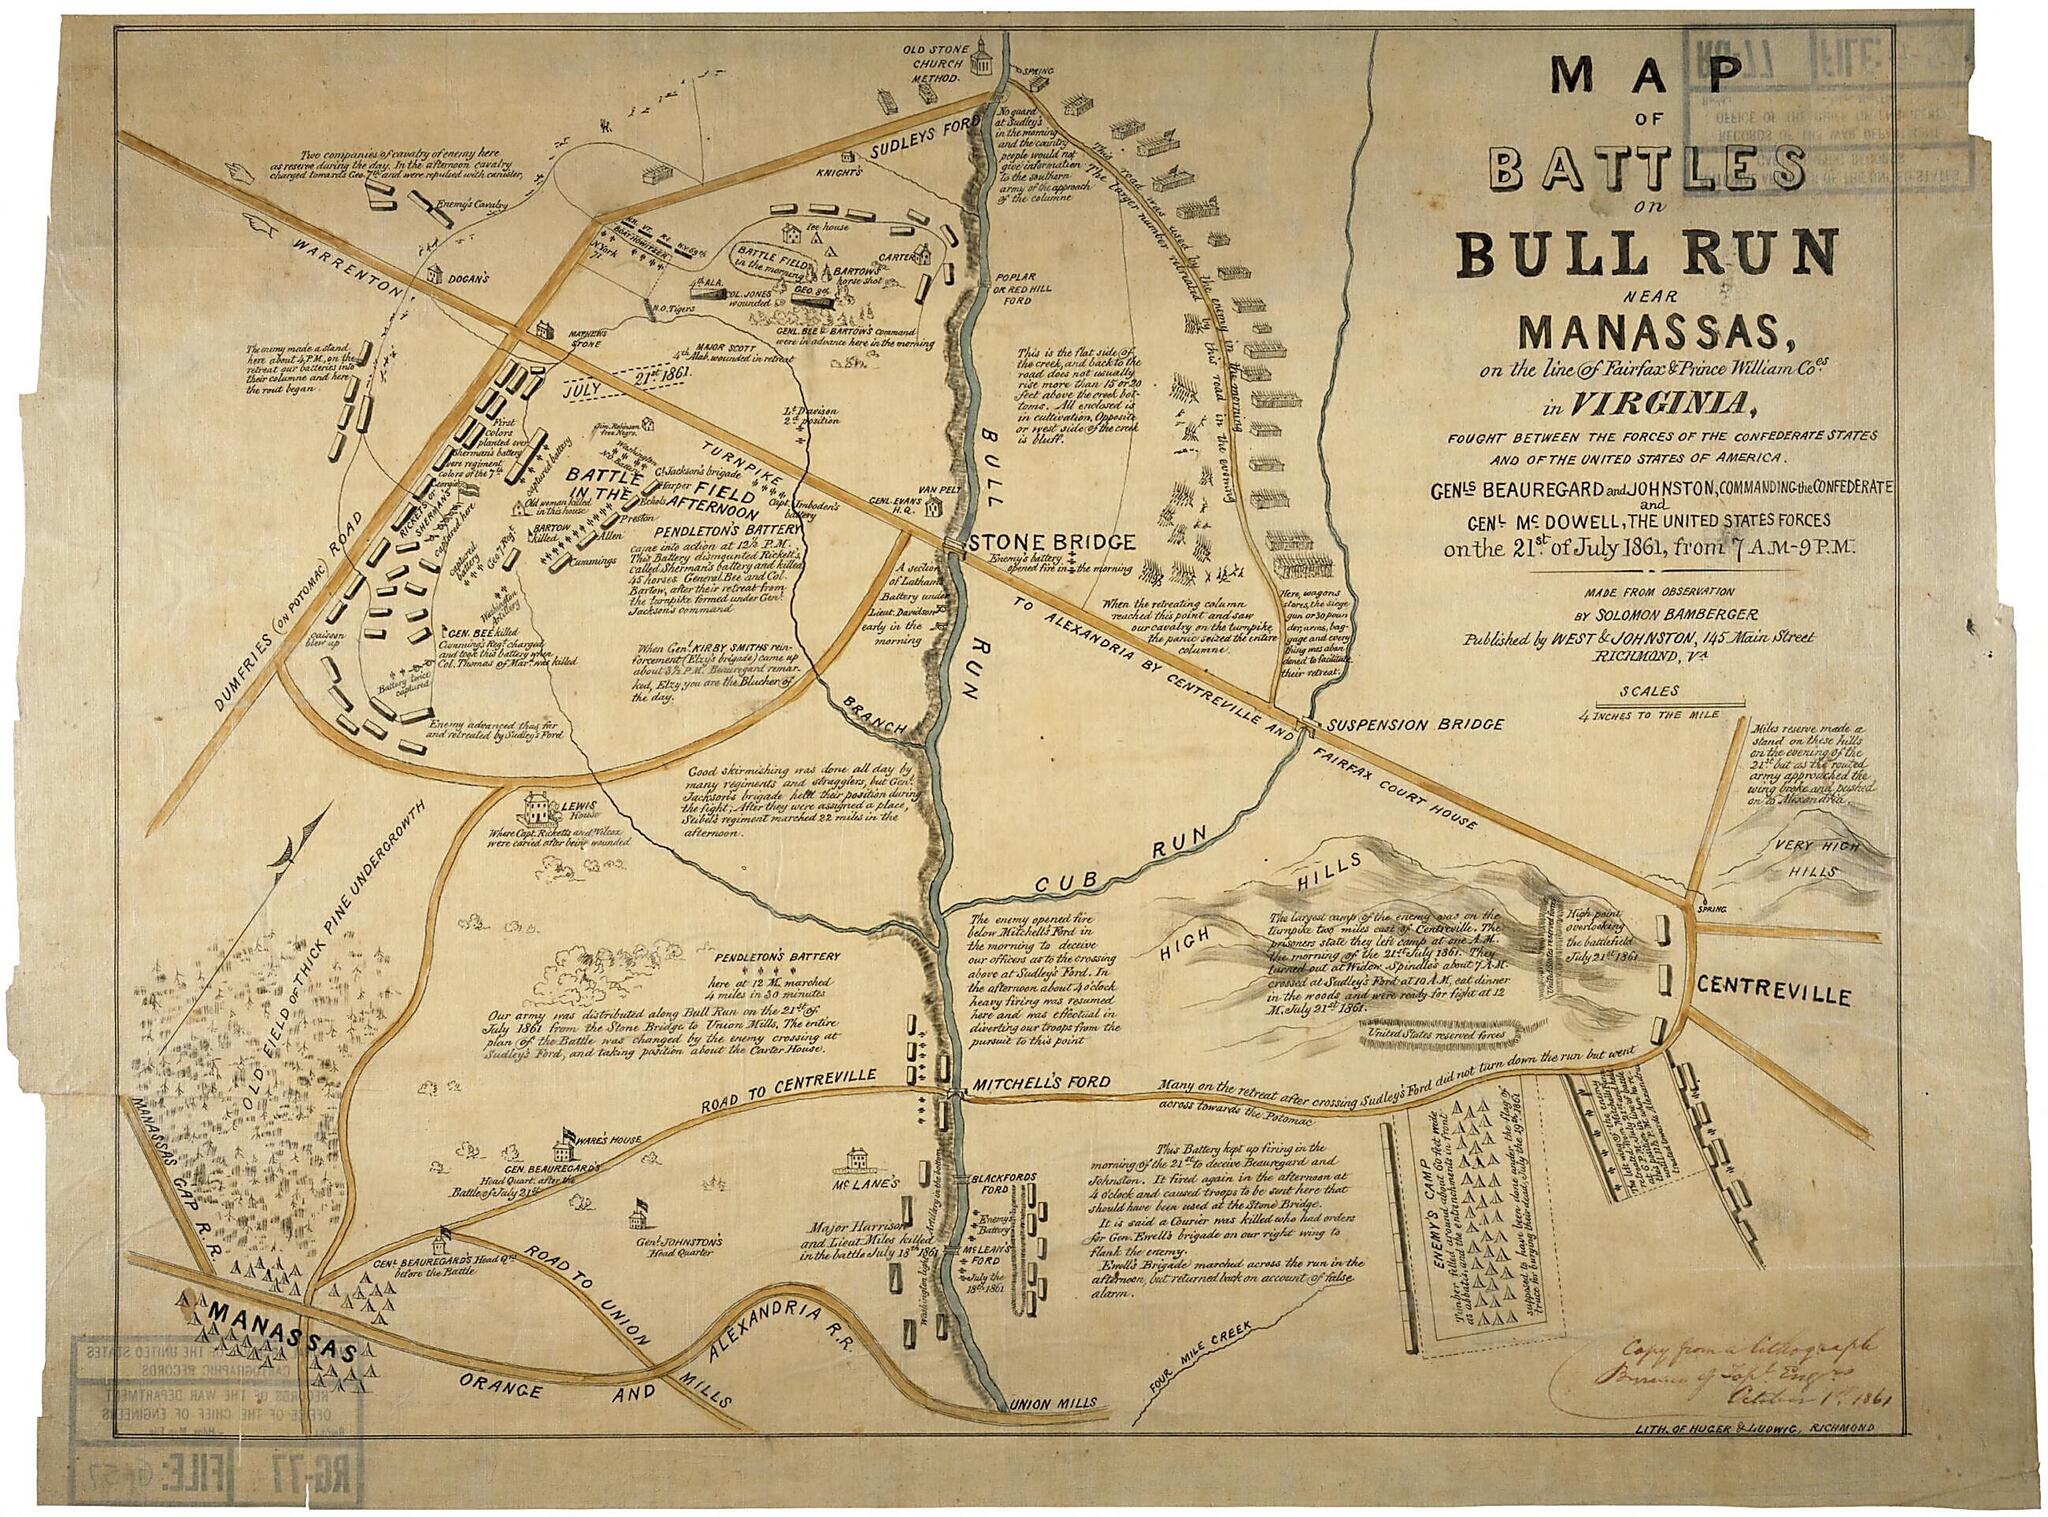 This old map of Map of the Battles of Bull Run Near Manassas from 1861 was created by Solomon Bamberger in 1861